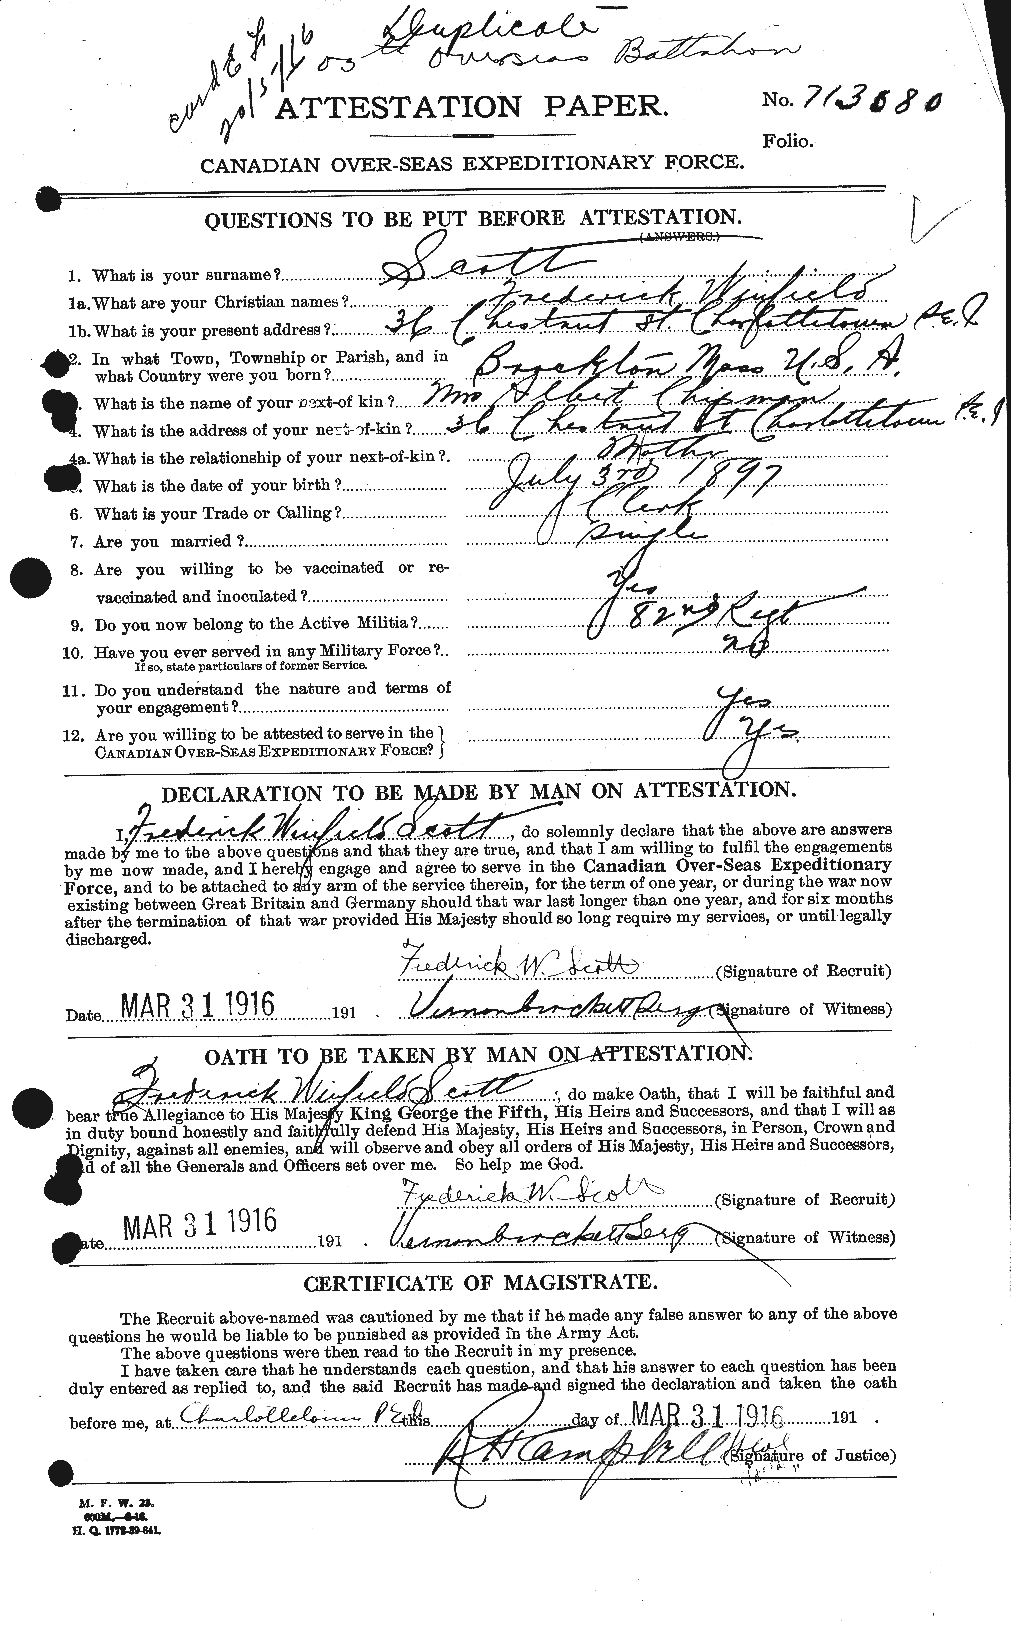 Personnel Records of the First World War - CEF 084378a